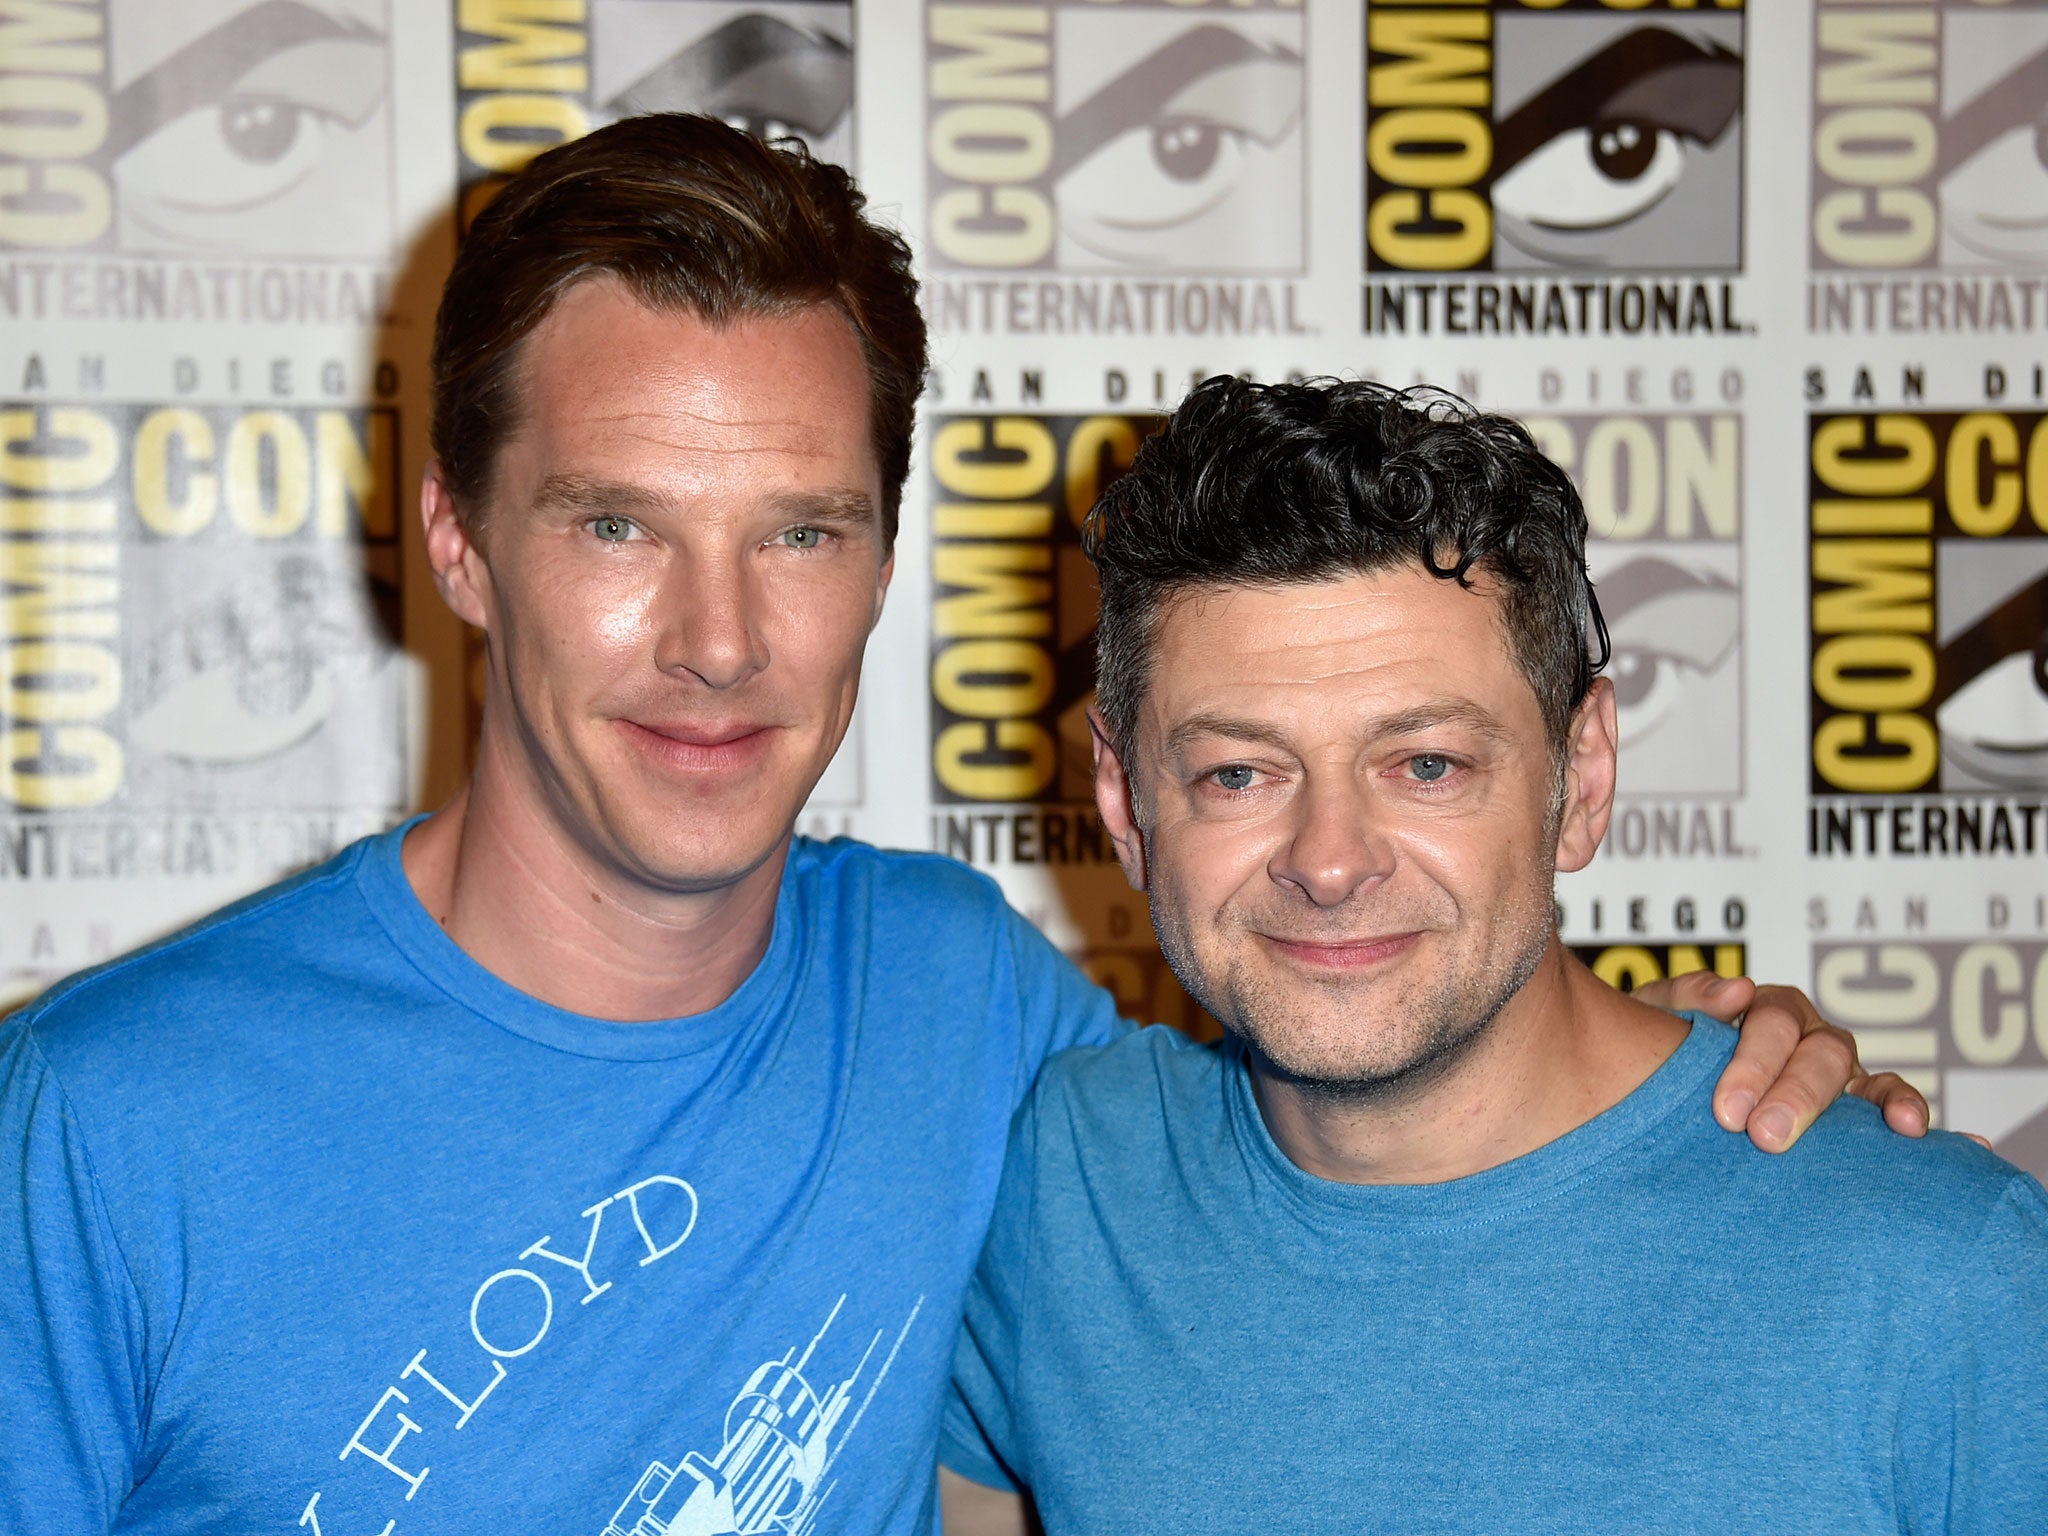 Benedict Cumberbatch will voice Shere Khan in Andy Serkis' movie take on The Jungle Book